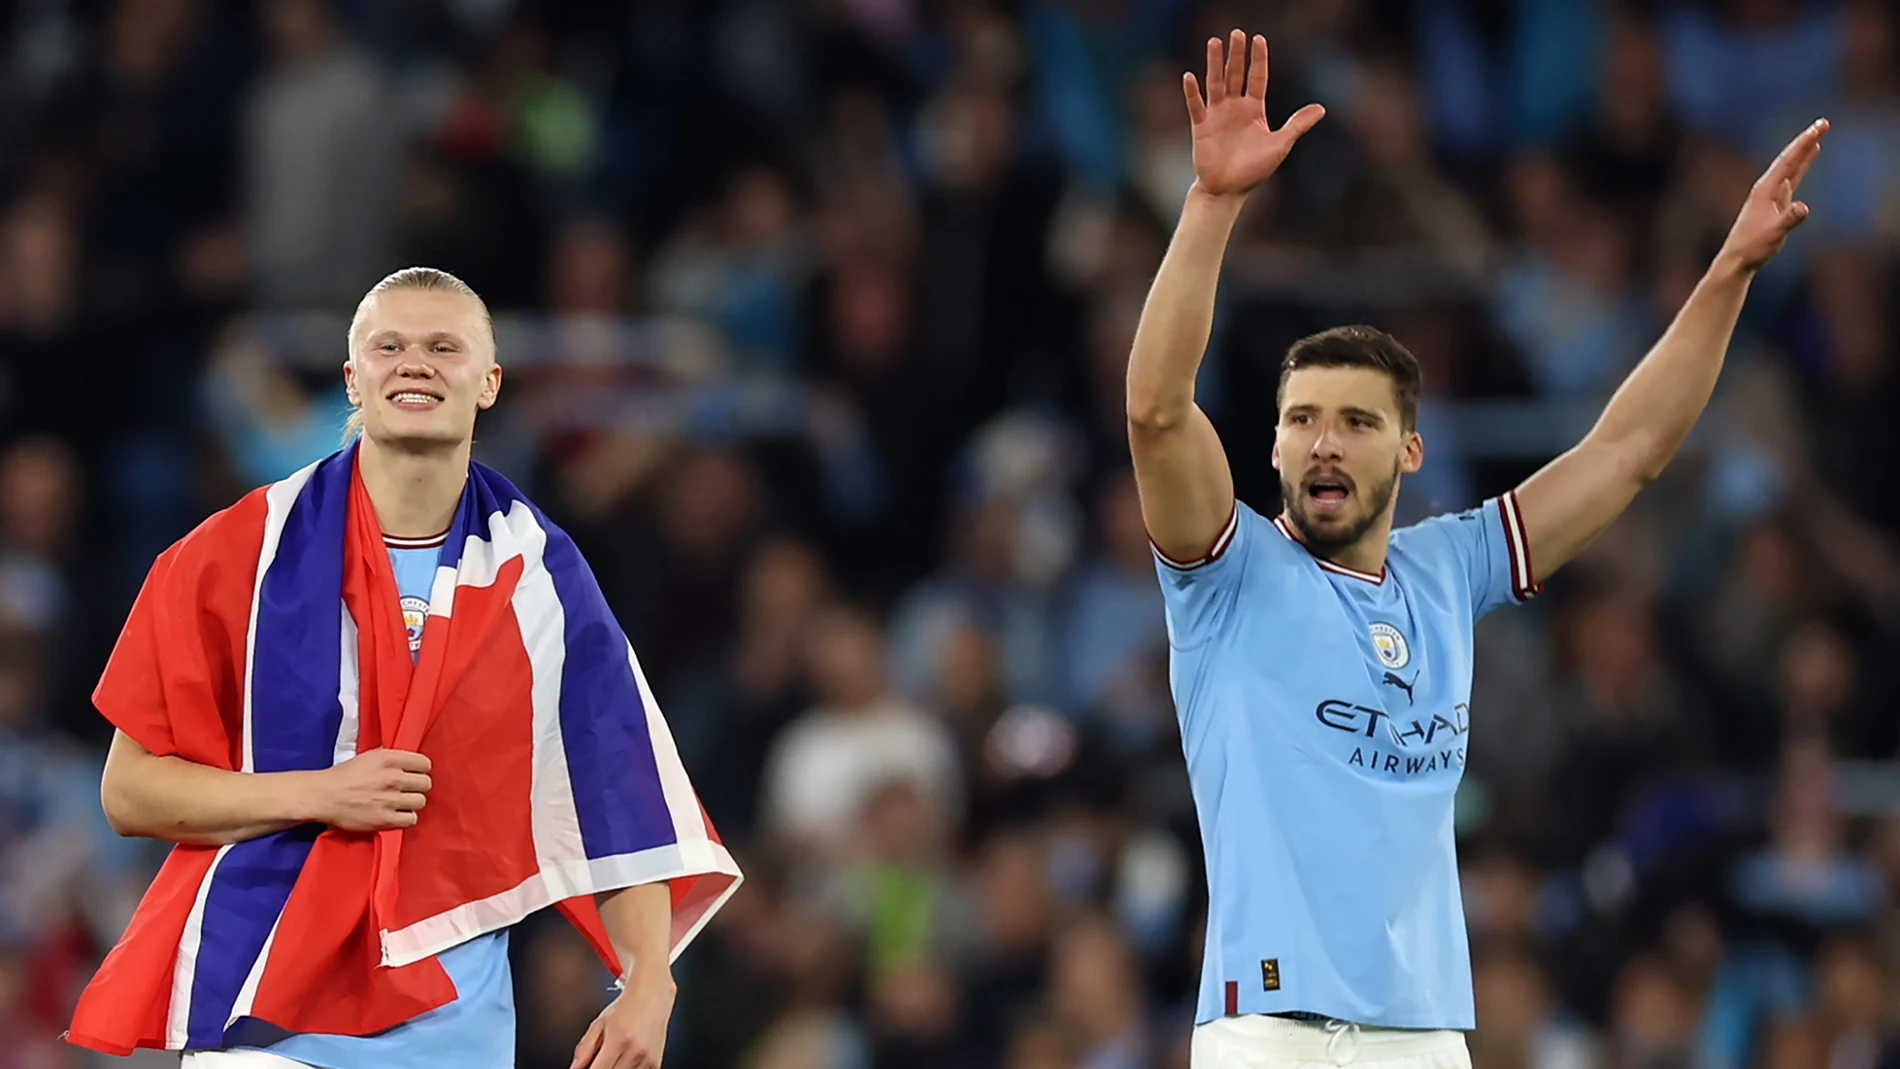 Manchester (United Kingdom), 17/05/2023.- Erling Haaland (L) and Ruben Dias of Manchester City celebrate after winning the UEFA Champions League semi-finals, 2nd leg soccer match between Manchester City and Real Madrid in Manchester, Britain, 17 May 2023. Manchester City won 4-0. (Liga de Campeones, Reino Unido) EFE/EPA/DAVID RAWCLIFFE 